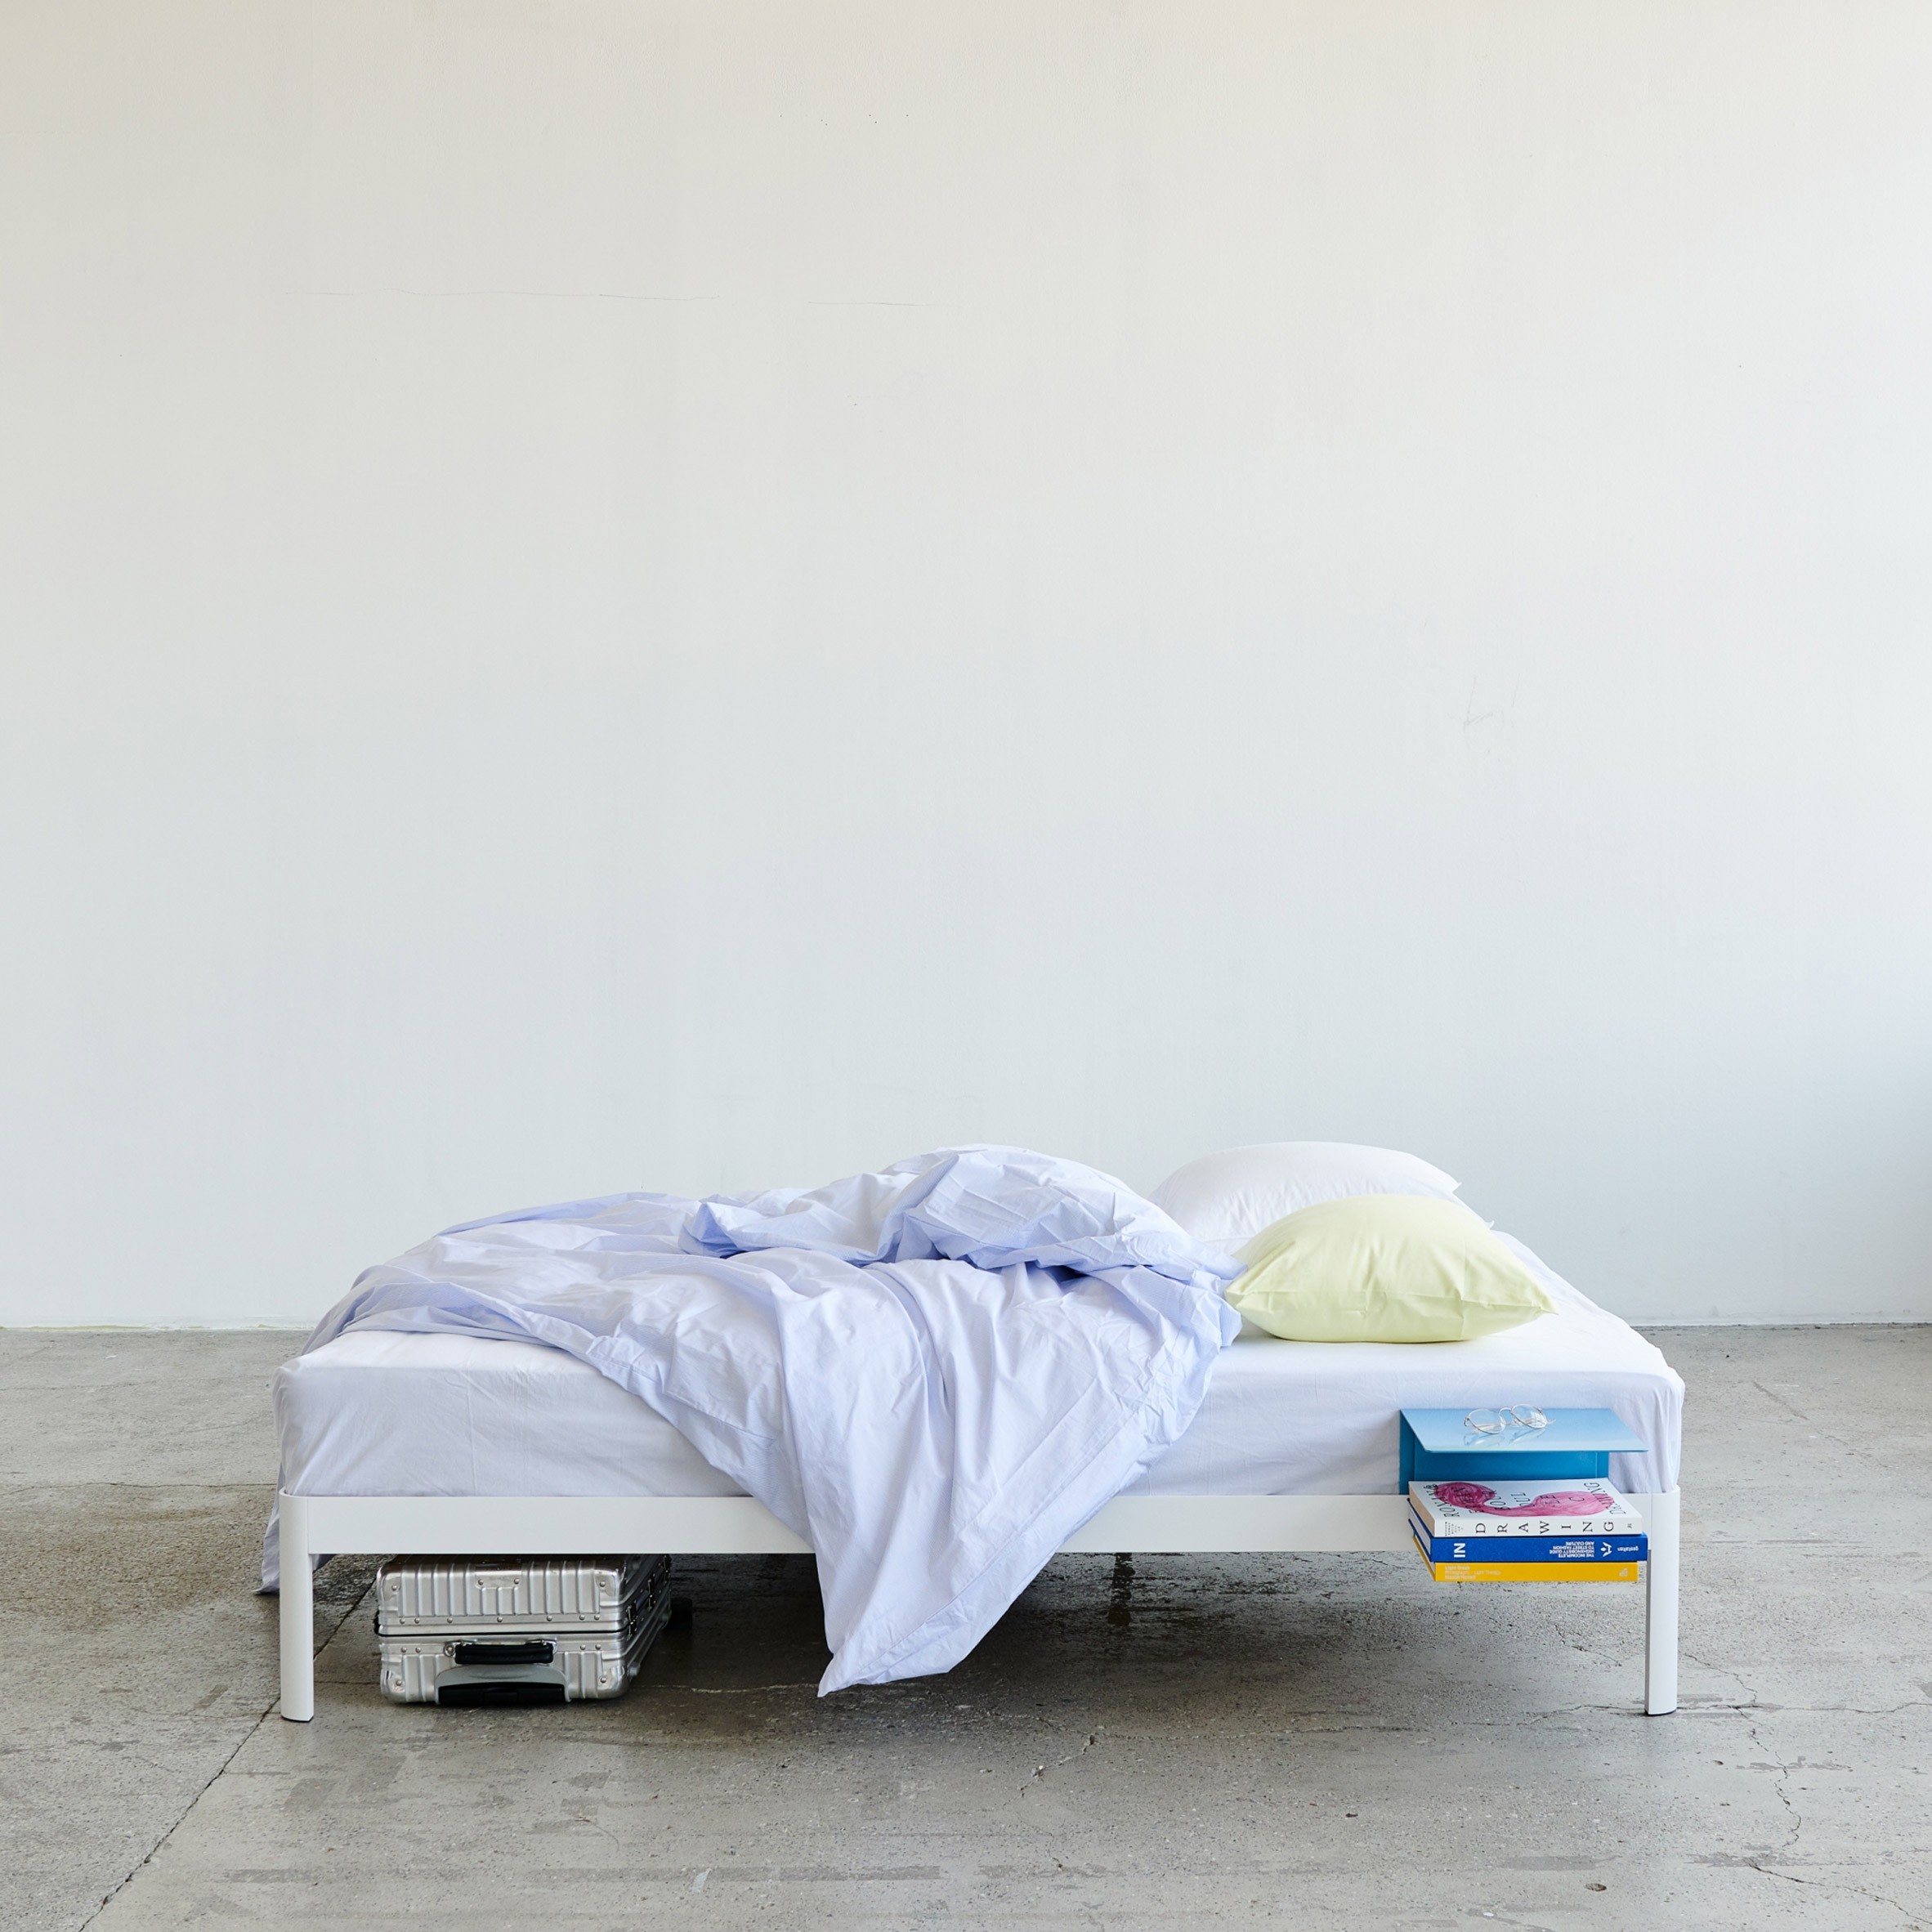 Photograph of a white bed with blue and yellow bed linen and a suitcase underneath in a white room